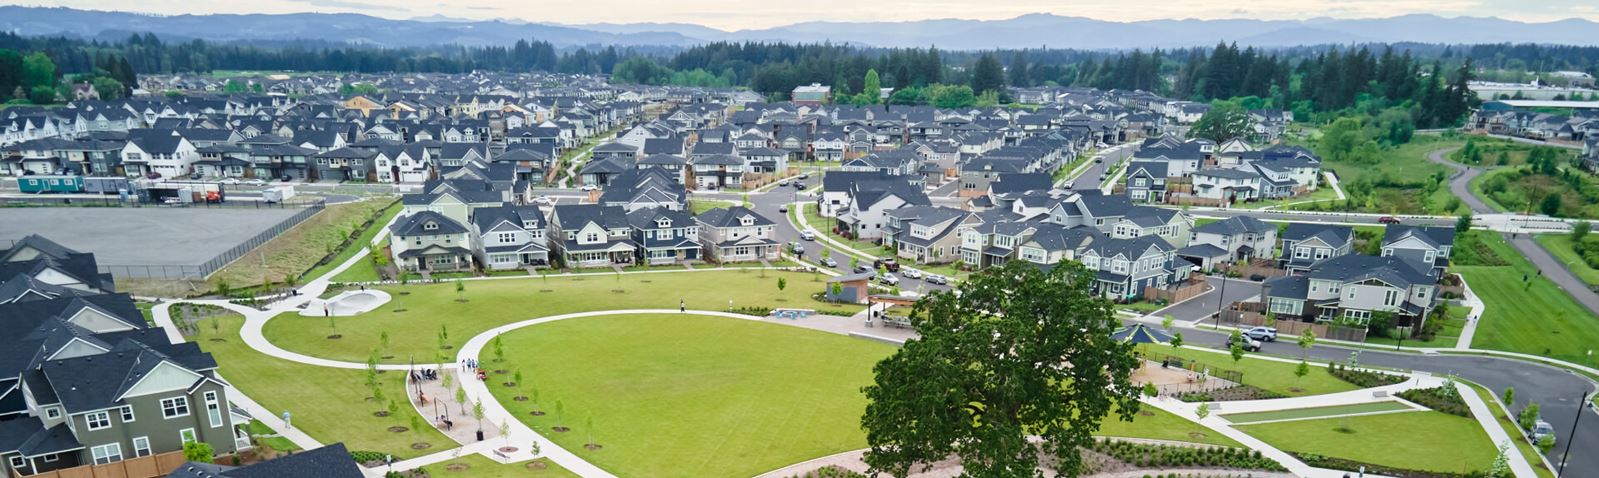 Aerial view of Reed's Crossing community in Hillsboro, OR